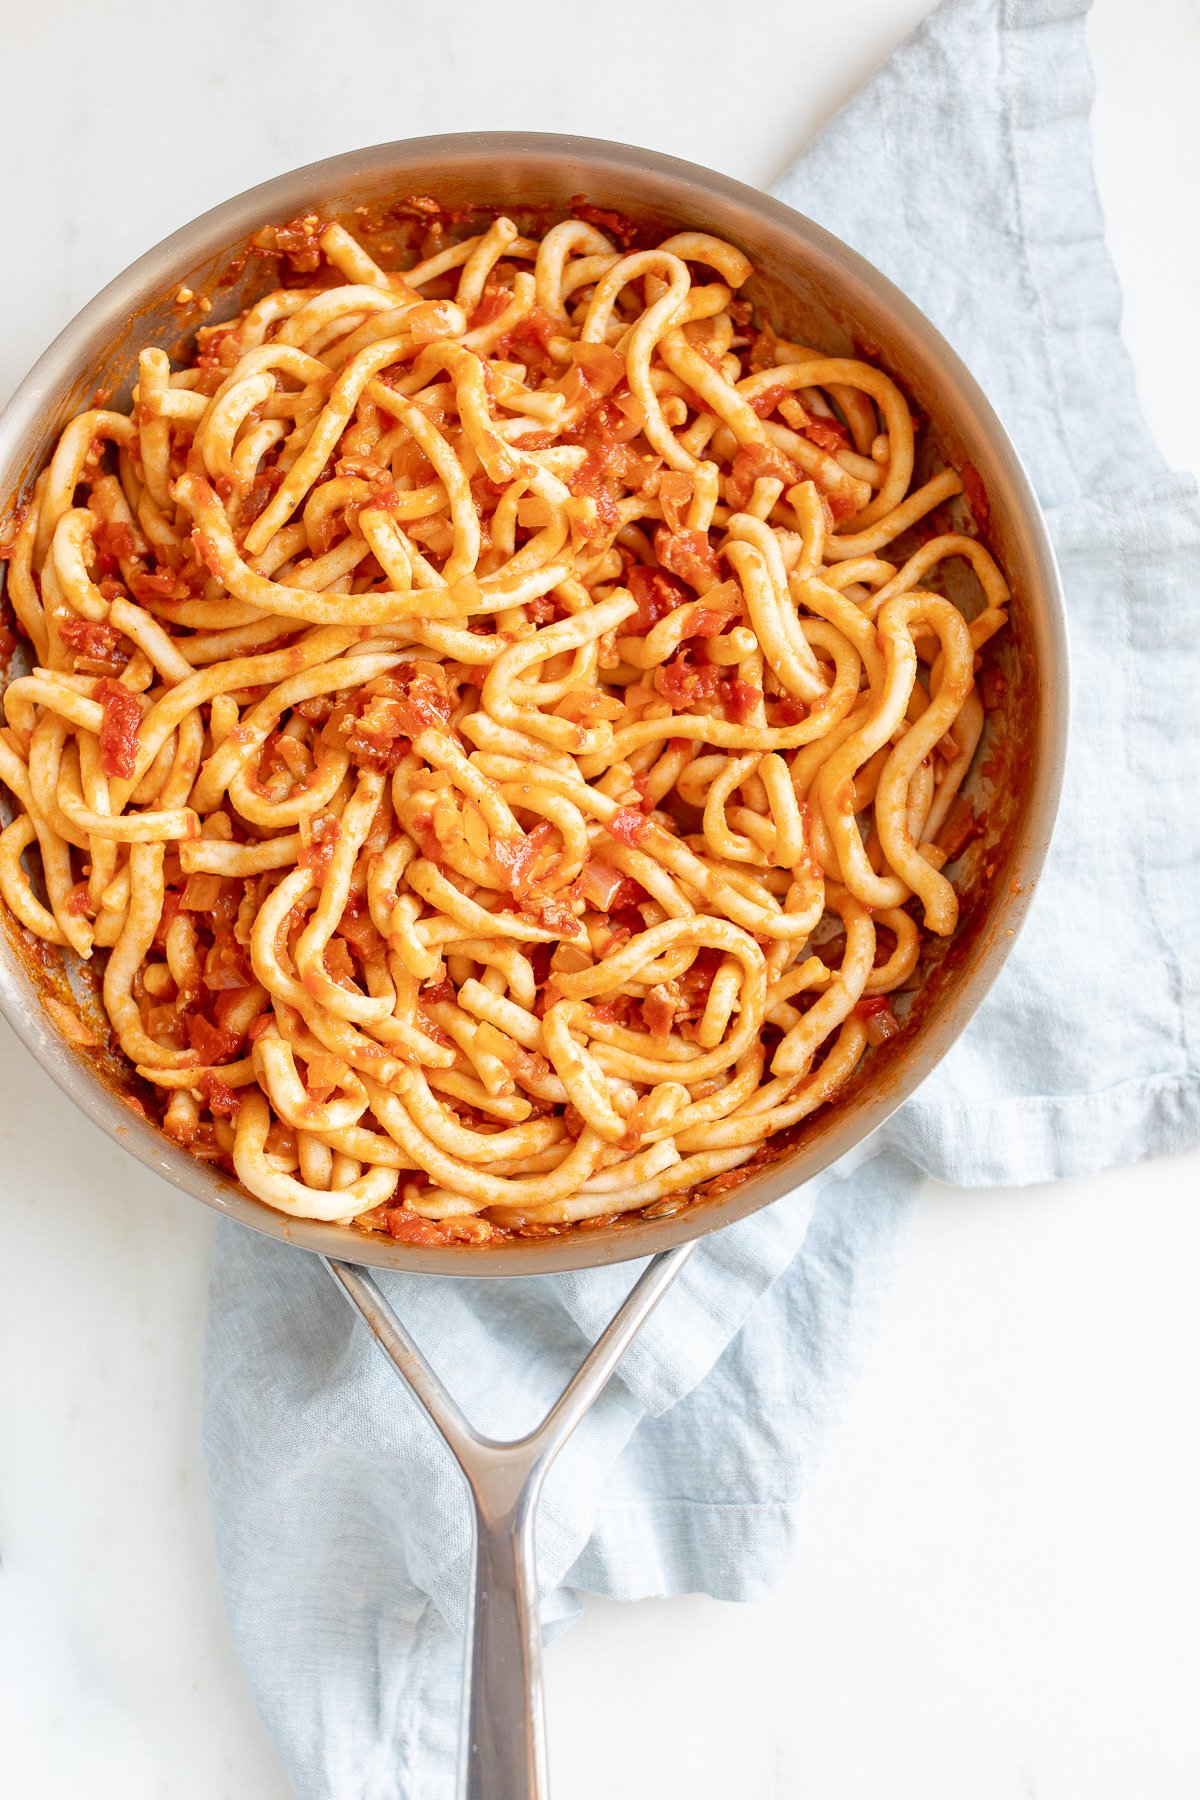 A skillet with amatriciana sauce-coated bucatini pasta.